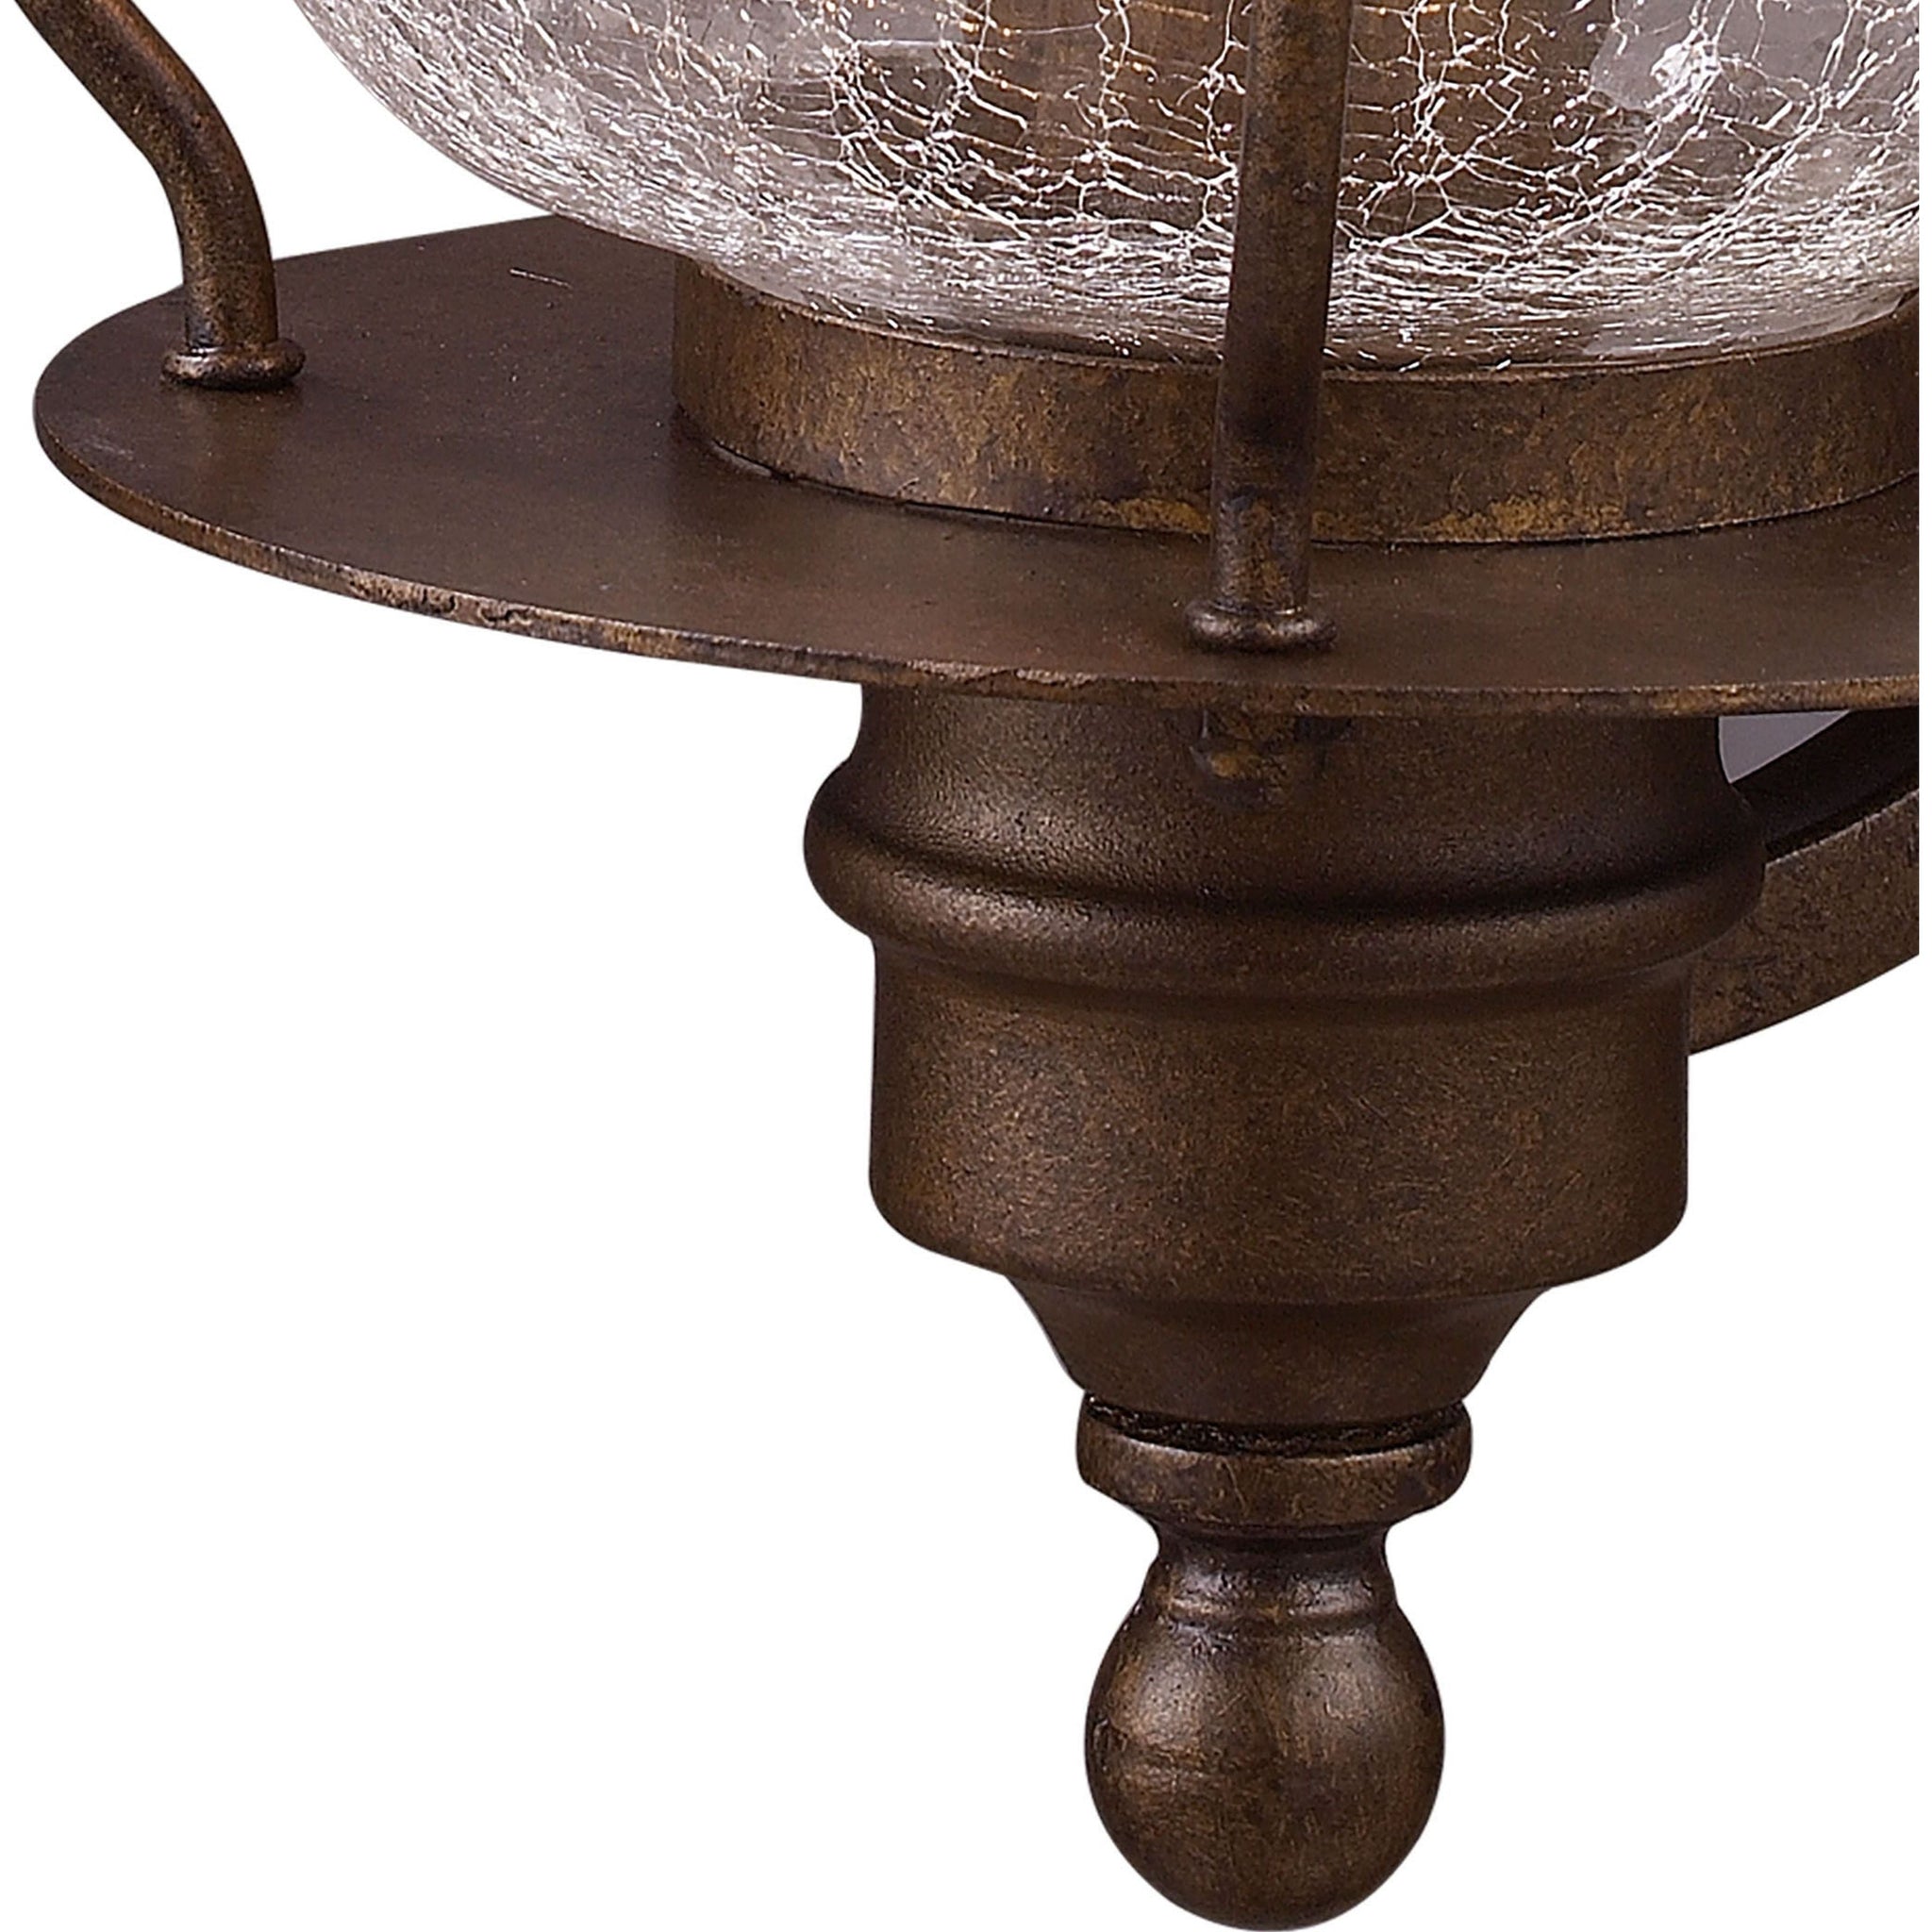 Wikshire 15" High 1-Light Outdoor Sconce